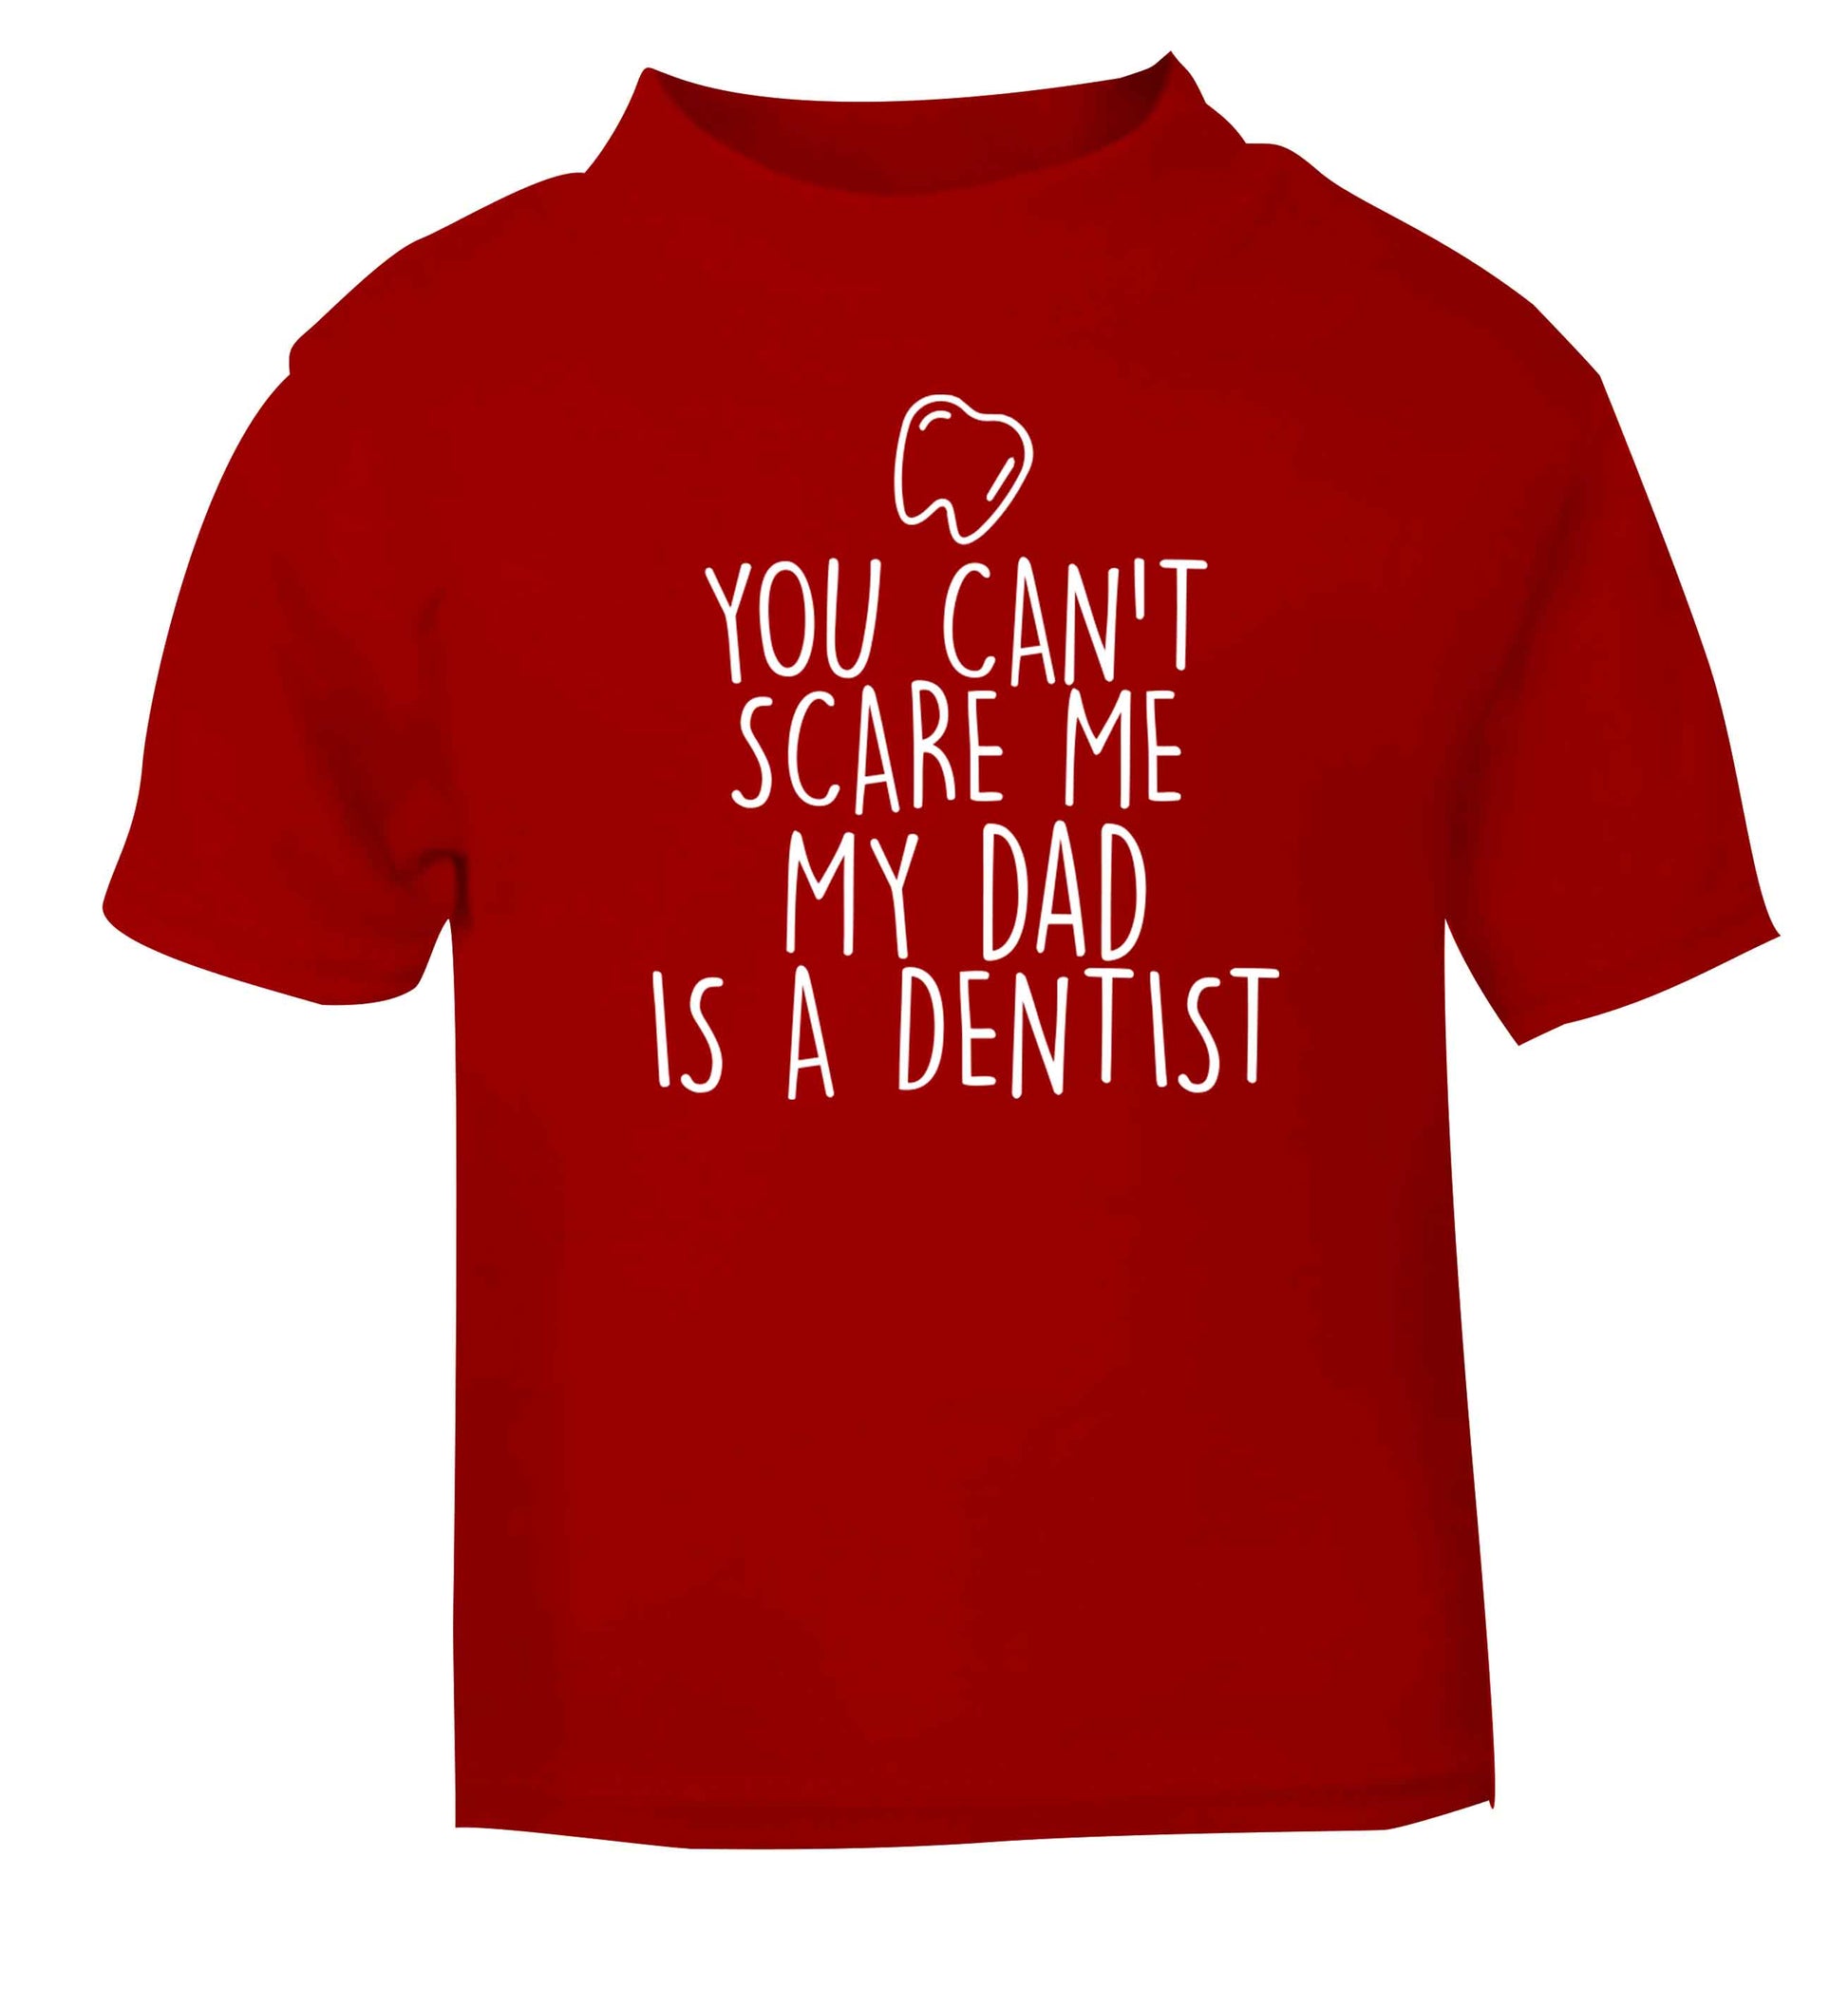 You can't scare me my dad is a dentist red baby toddler Tshirt 2 Years